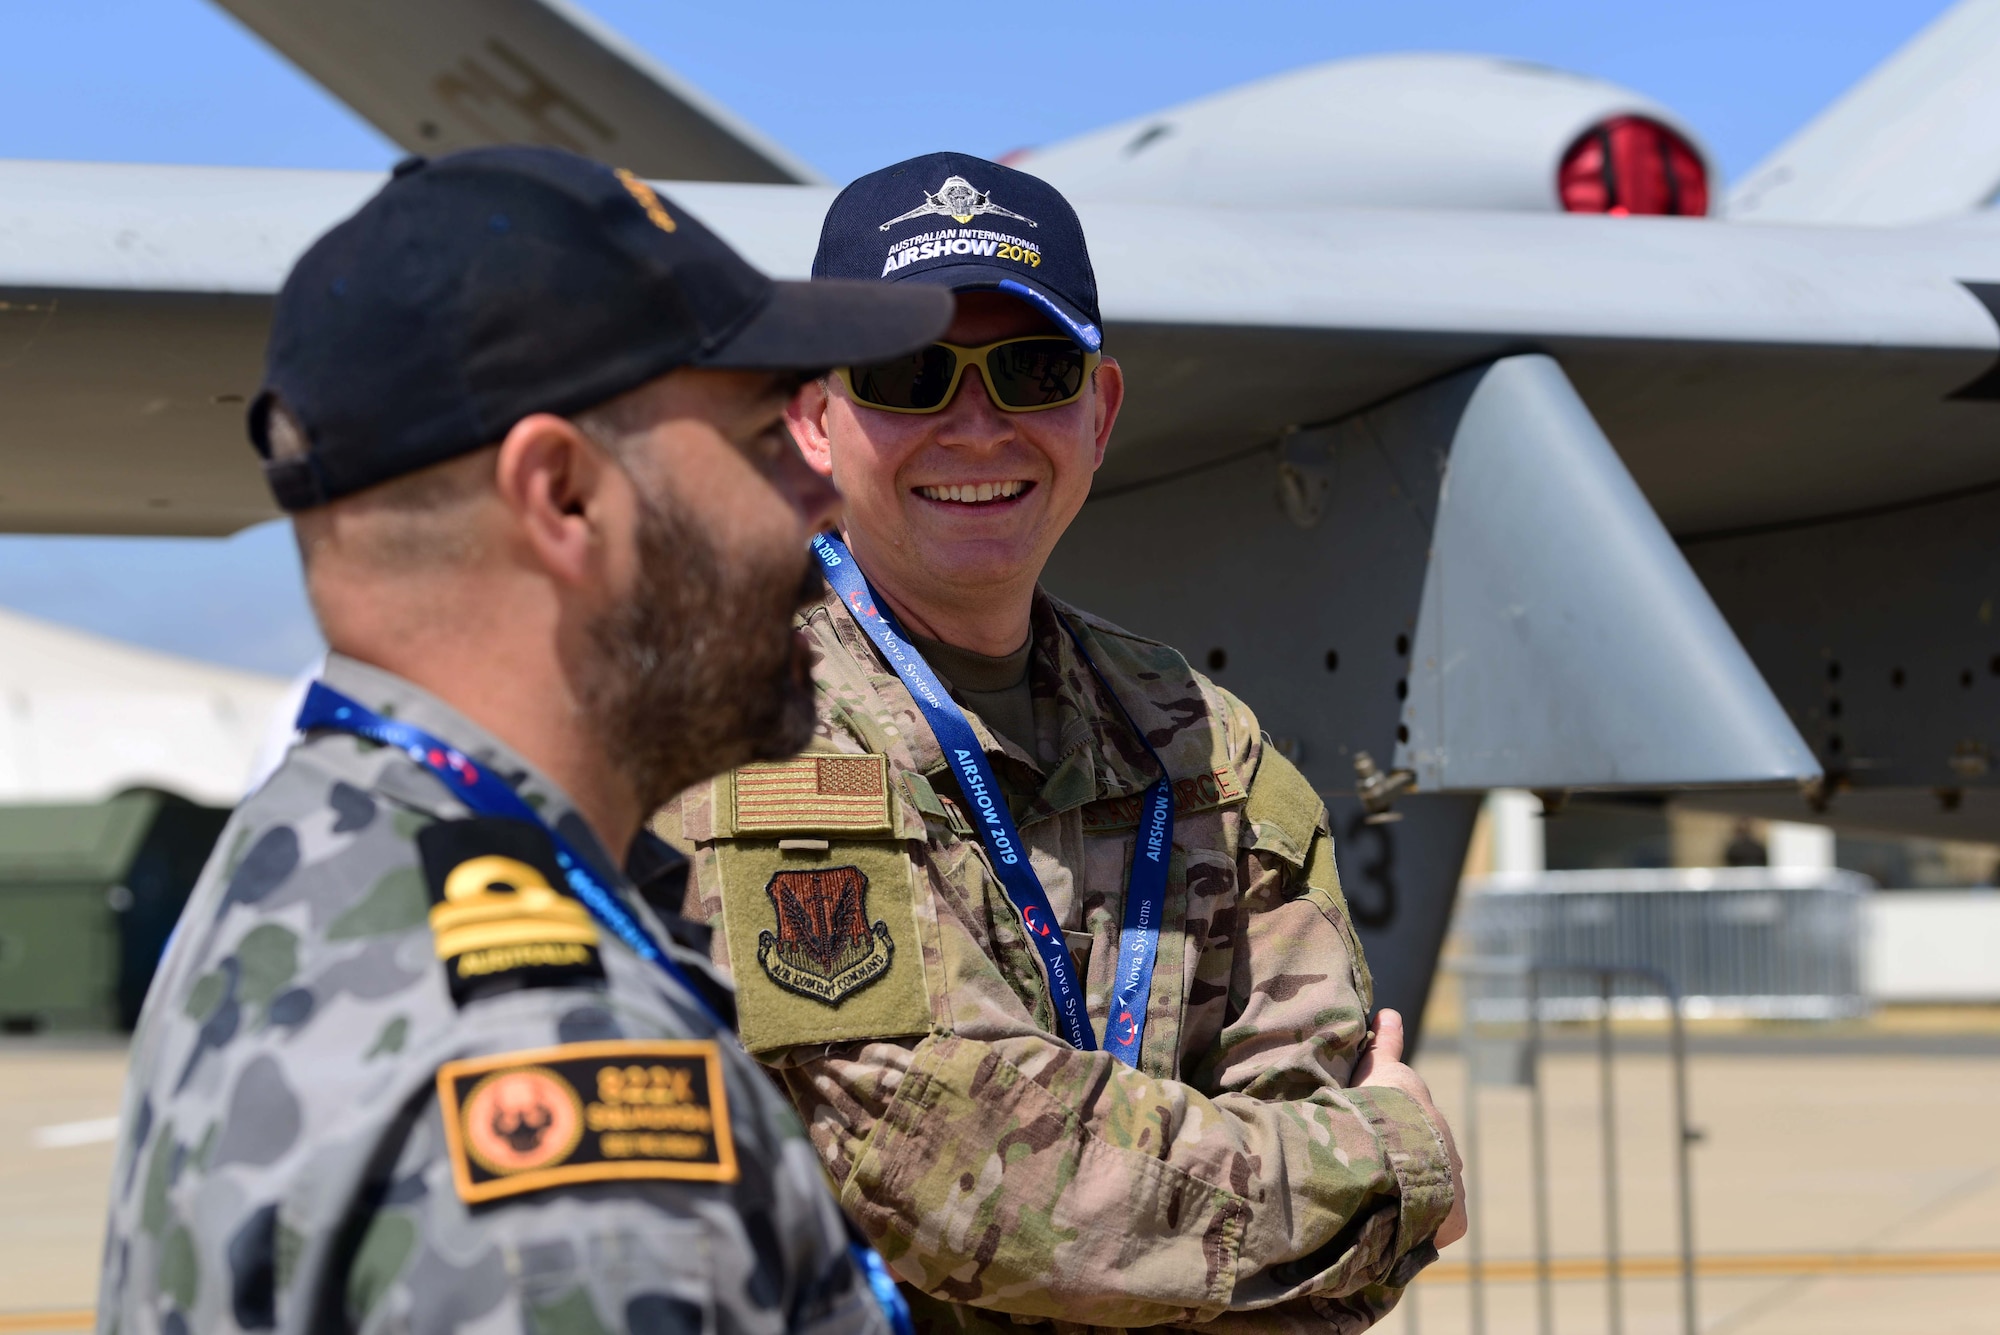 Master Sgt. Daren speaks with a member of the Australian Defence Force about the MQ-9 Reaper during the Australian International Airshow, Feb. 26, 2019, in Geelong, Victoria, Australia. In line with the focus of strengthening the relationship between the Australian Defence Force and United States Military, the U.S. Air Force and Creech Airmen brought the Remotely Piloted Aircraft to be displayed during this airpower demonstration. (U.S. Air Force photo by Airman 1st Class Haley Stevens)